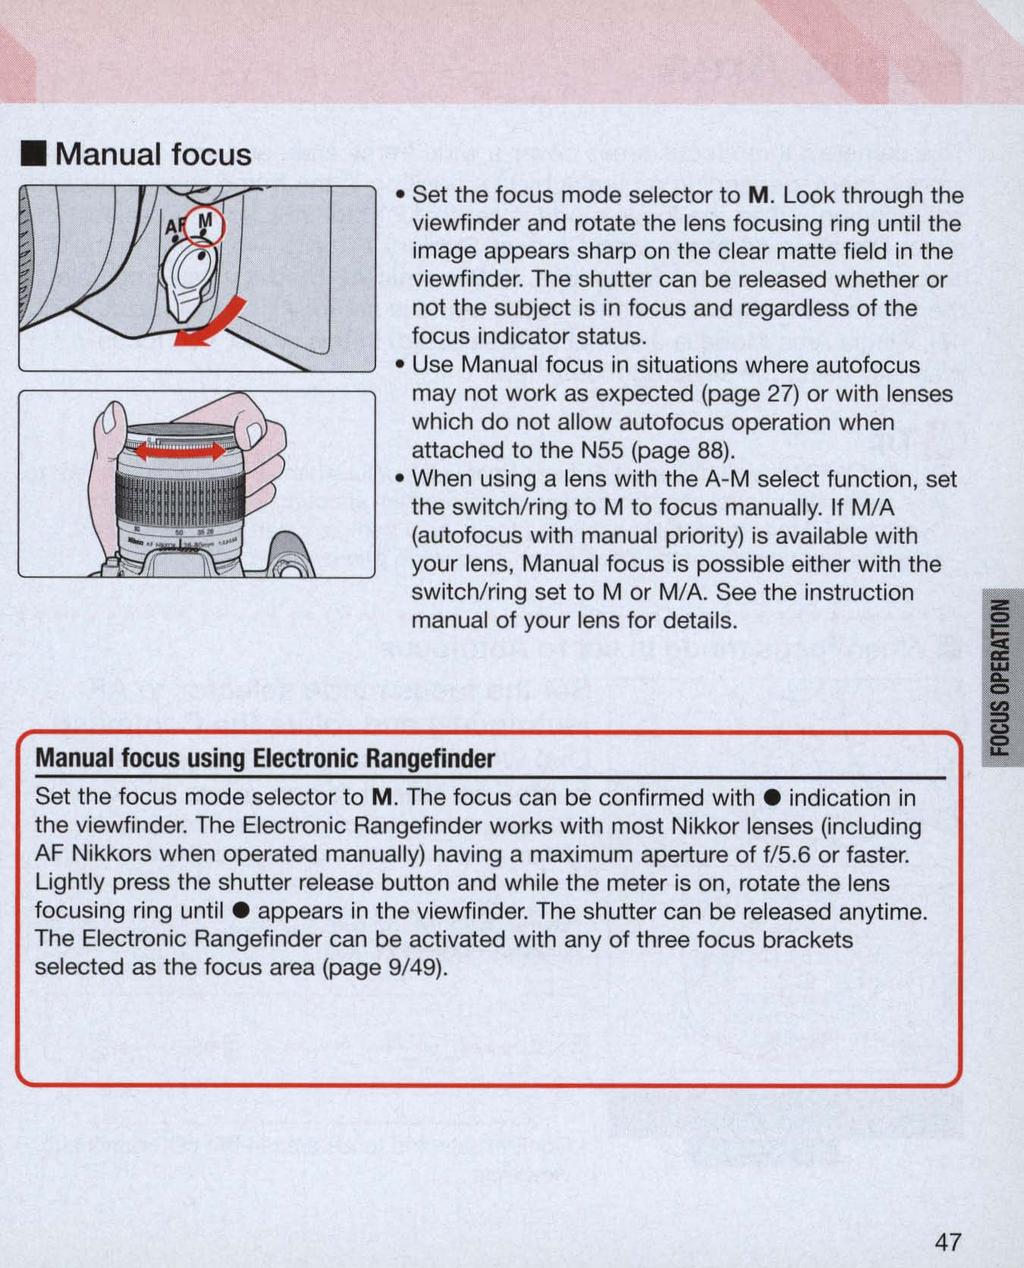 Manual focus Set the focus mode selector to M. Look through the viewfinder and rotate the lens focusing ring until the image appears sharp on the clear matte field in the viewfinder.